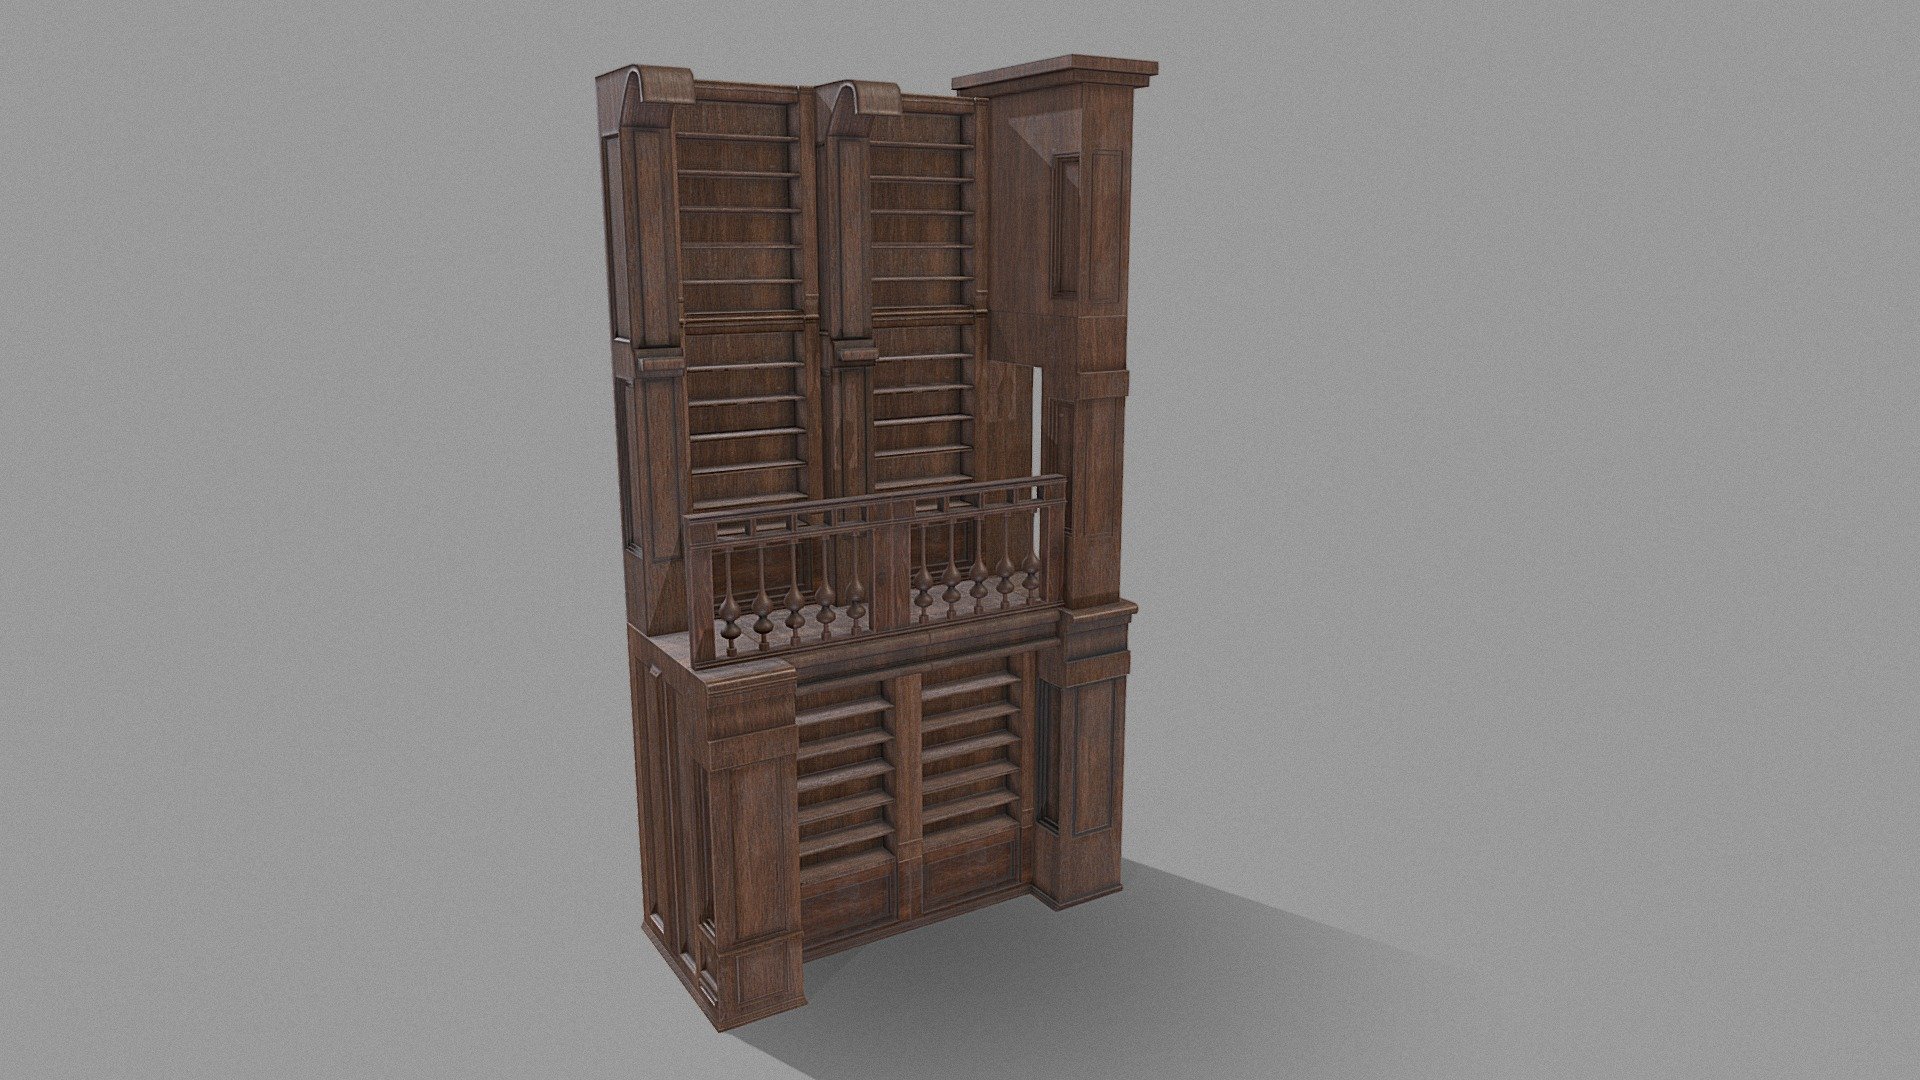 A collection of library parts.  Pillars, banisters, door frames and shelves. 

Handy collection of props, easily expandable to create an entire library or an office/study. 

PBR textures @4k - library / study collection - Buy Royalty Free 3D model by Sousinho 3d model